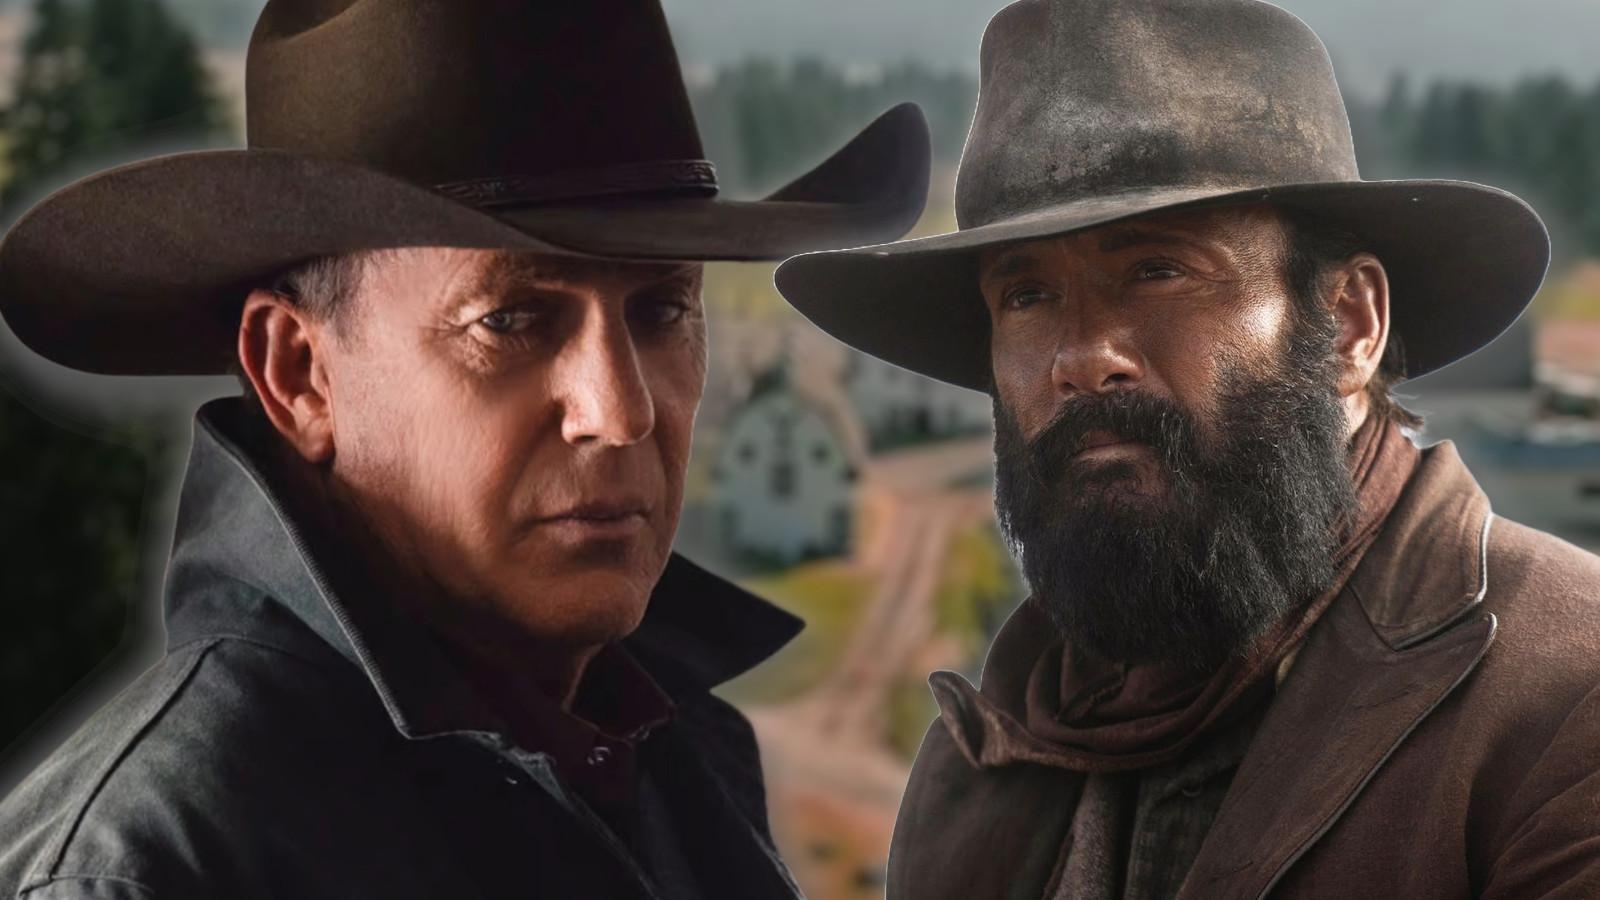 Kevin Costner as John Dutton in Yellowstone and Tim McGraw as James Dutton in 1883